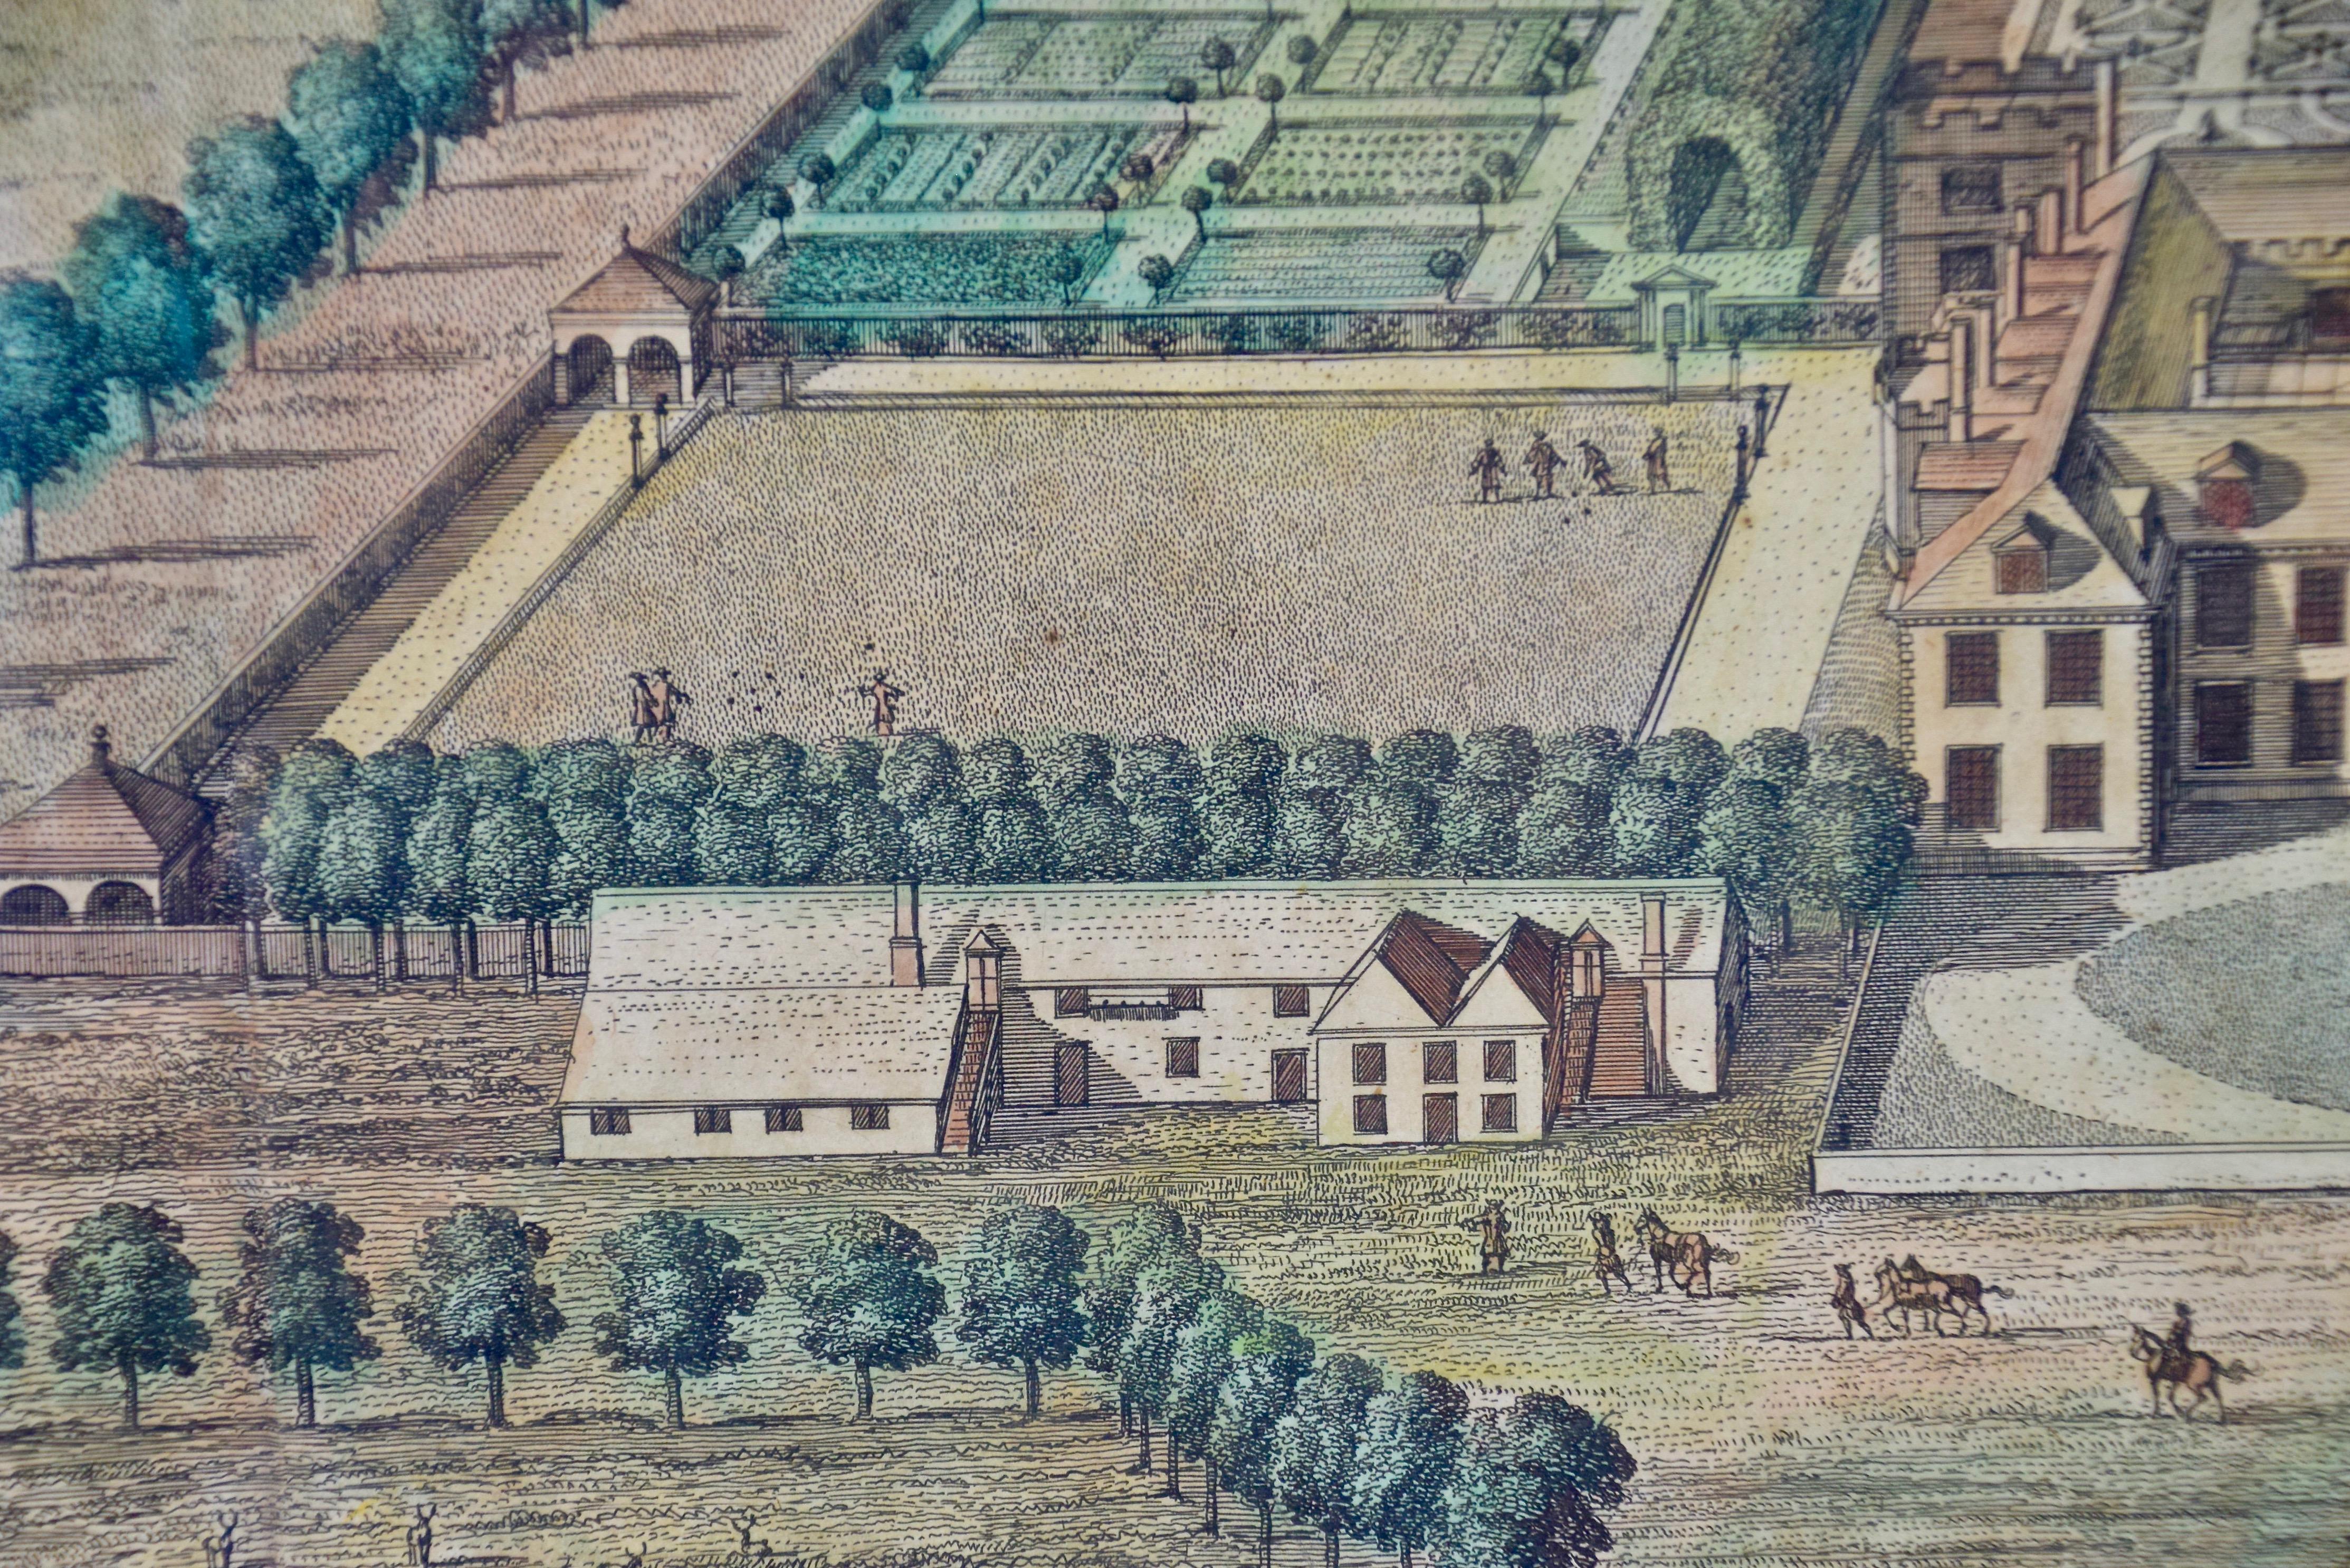 An original early 18th century hand-colored copper engraving by Johannes (Jan) Kip (1652-1722) from a drawing by Leonard Knyff (1650-1722), published by Joseph Smith in London in 1707. Kip created views of great English estates illustrating 